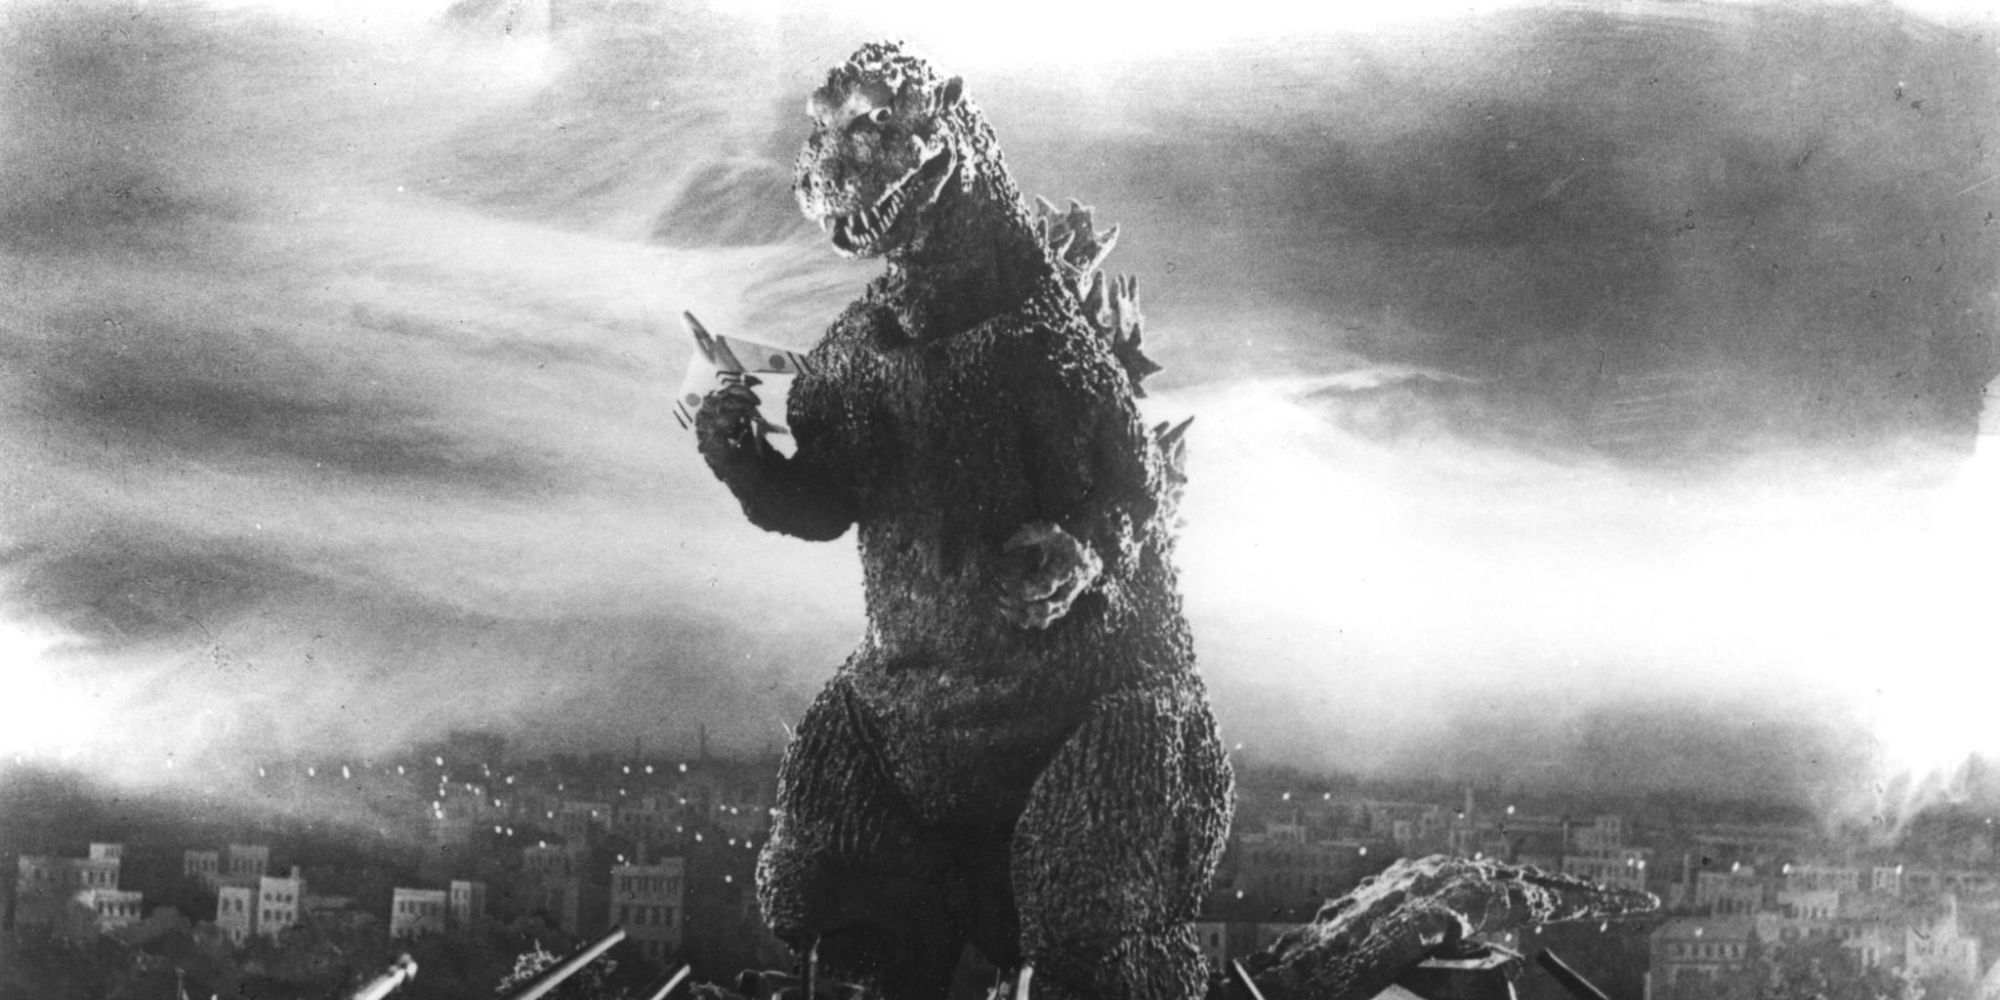 The giant Godzilla standing while holding a plane in Godzilla